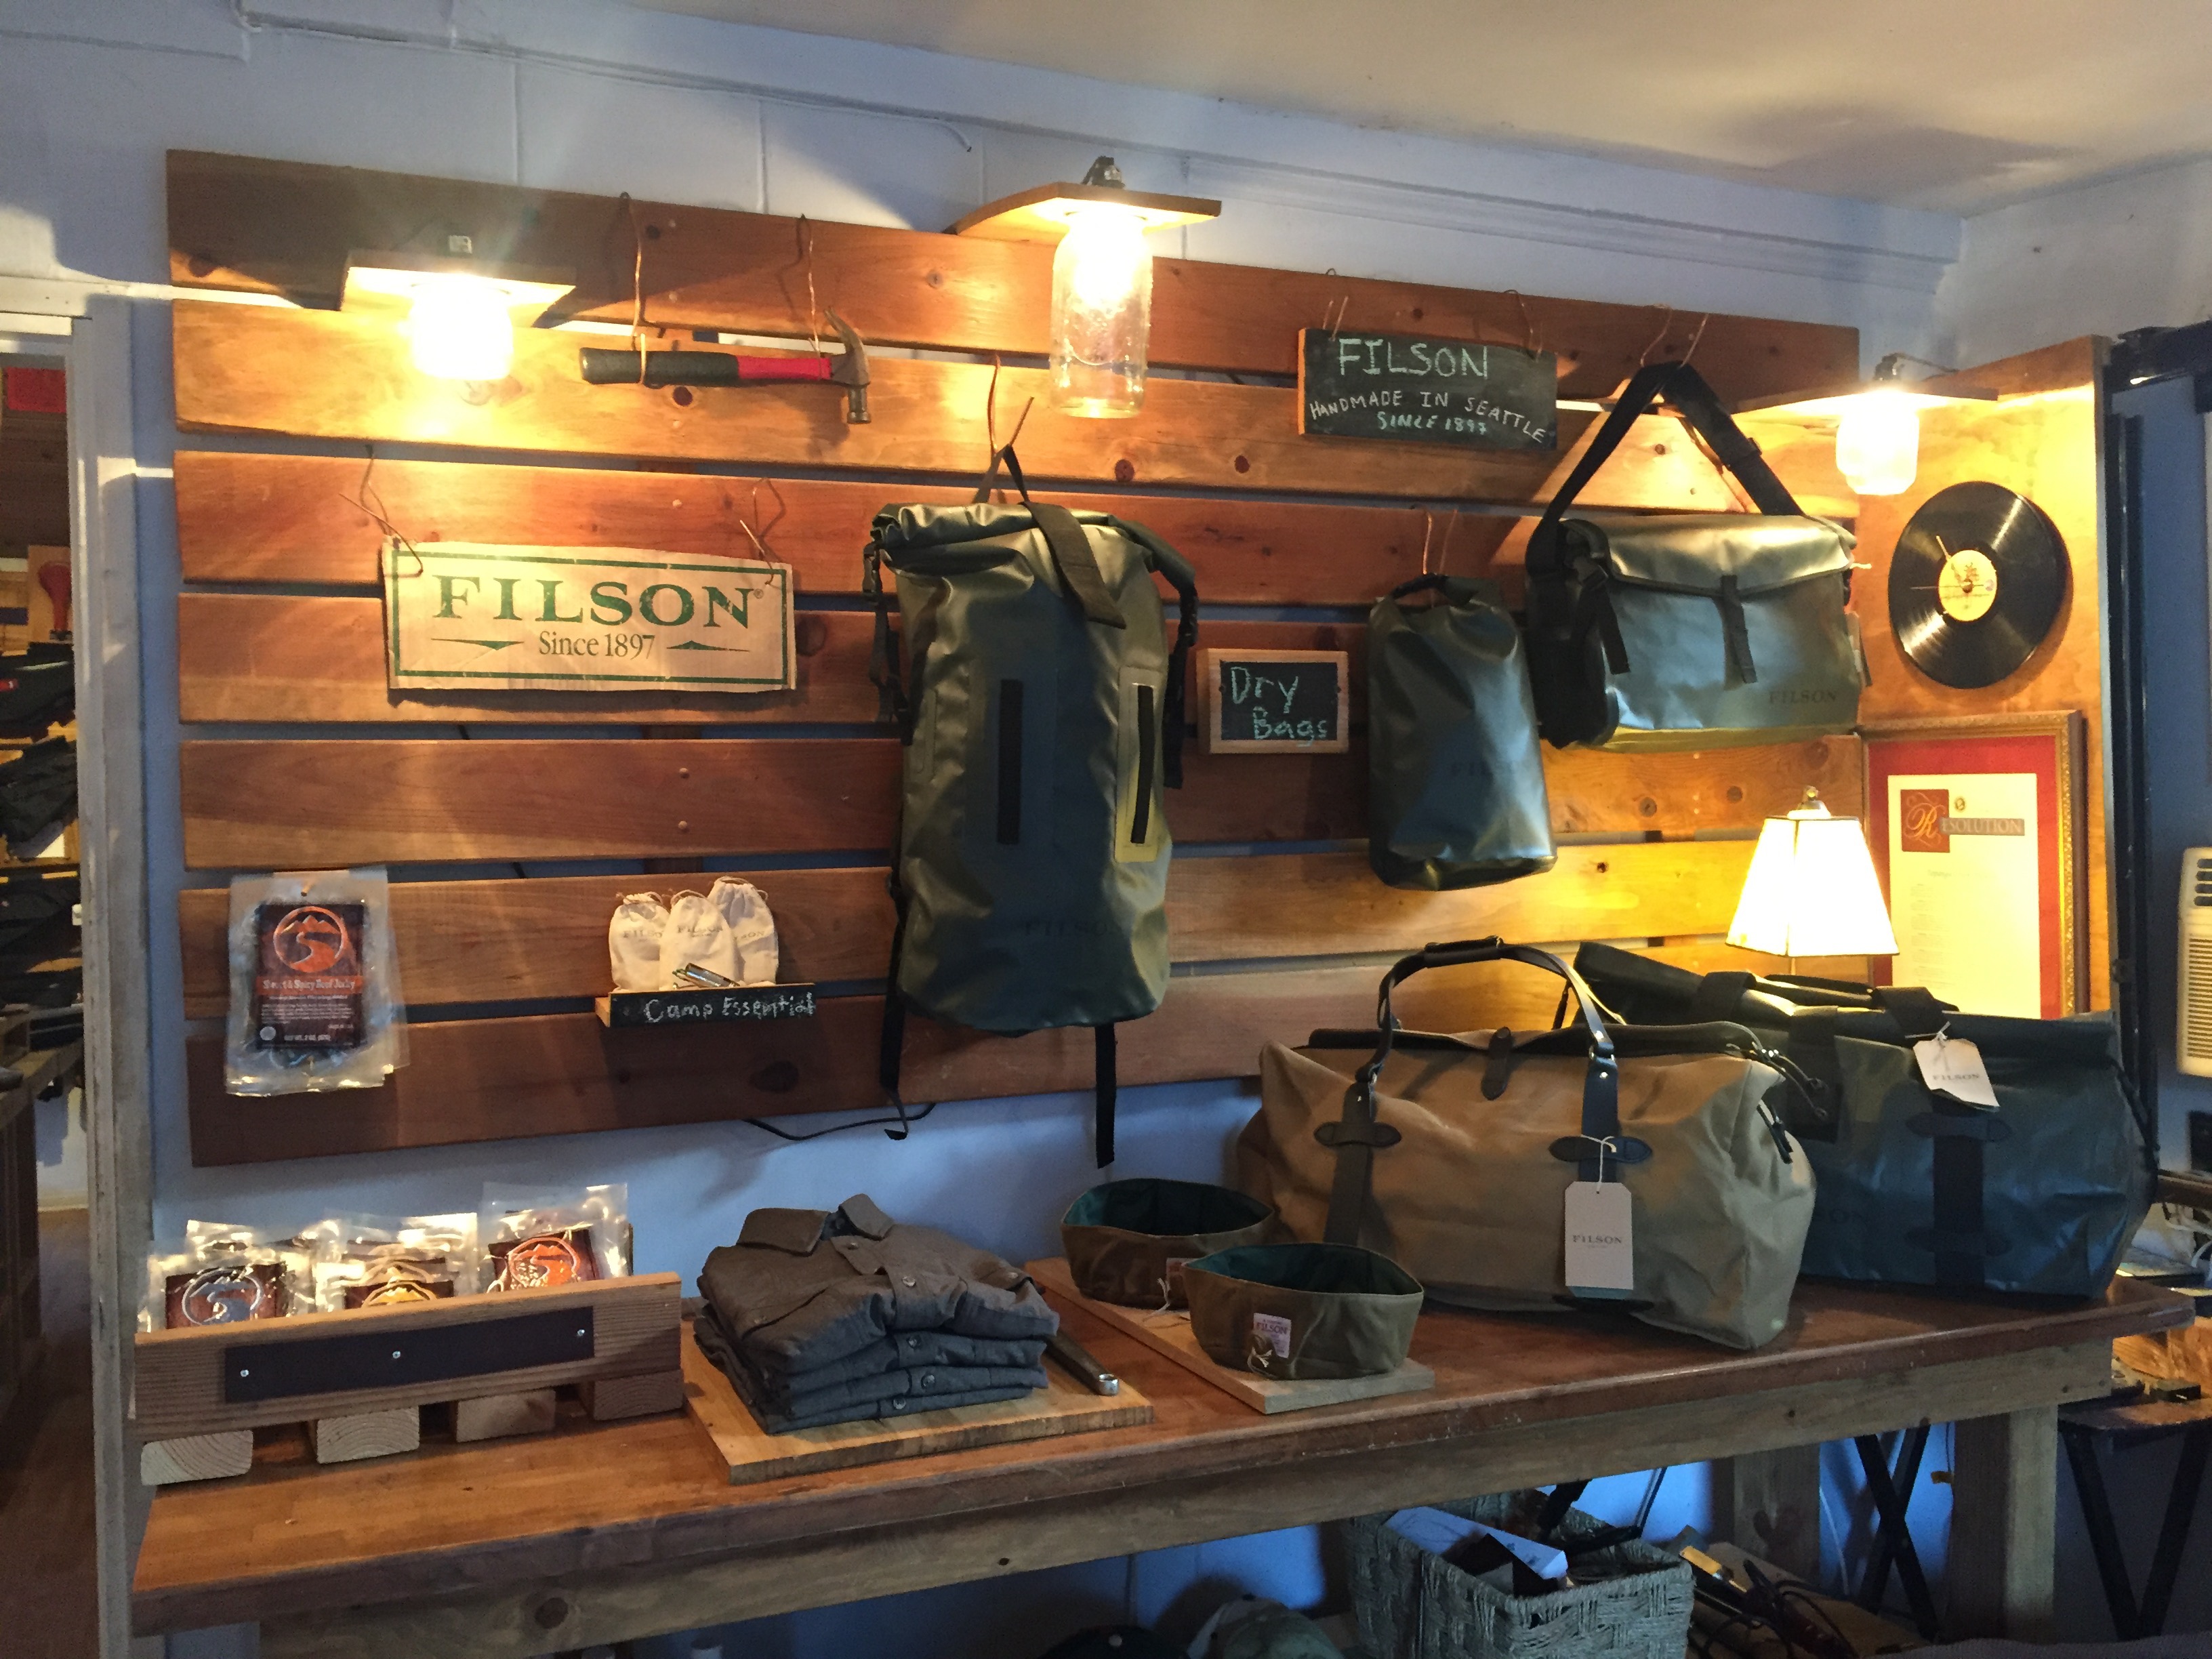 Filson gear is a great way to  continue our goal of best in class gear.  